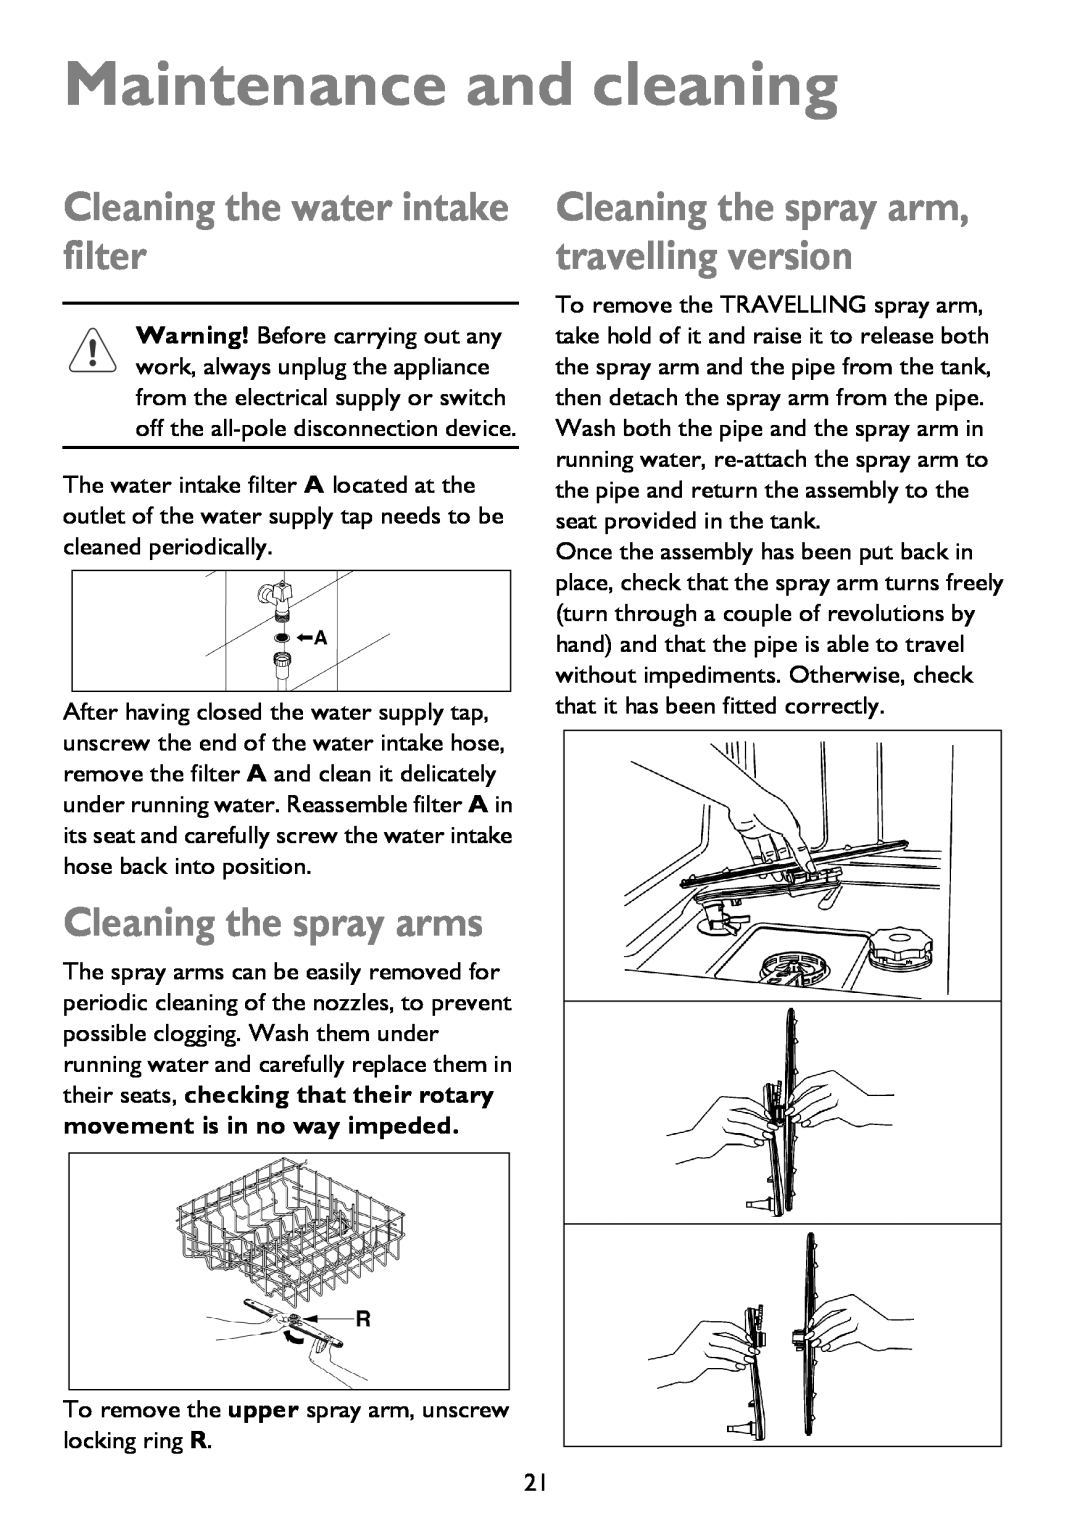 John Lewis JLDWS 907 instruction manual Maintenance and cleaning, Cleaning the water intake filter, Cleaning the spray arms 